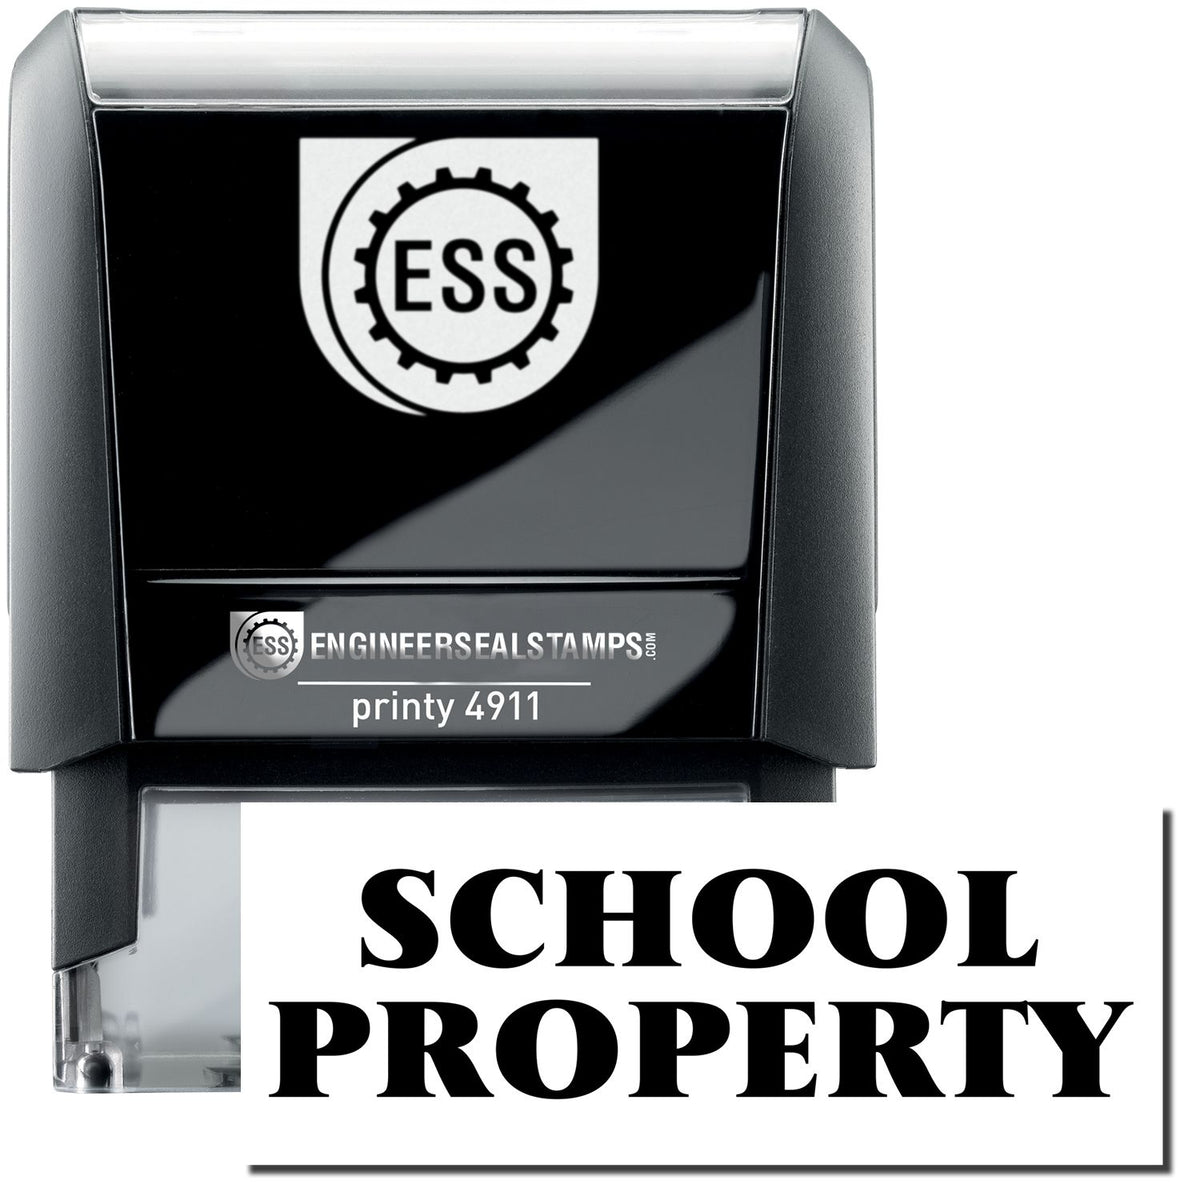 A self-inking stamp with a stamped image showing how the text &quot;SCHOOL PROPERTY&quot; is displayed after stamping.